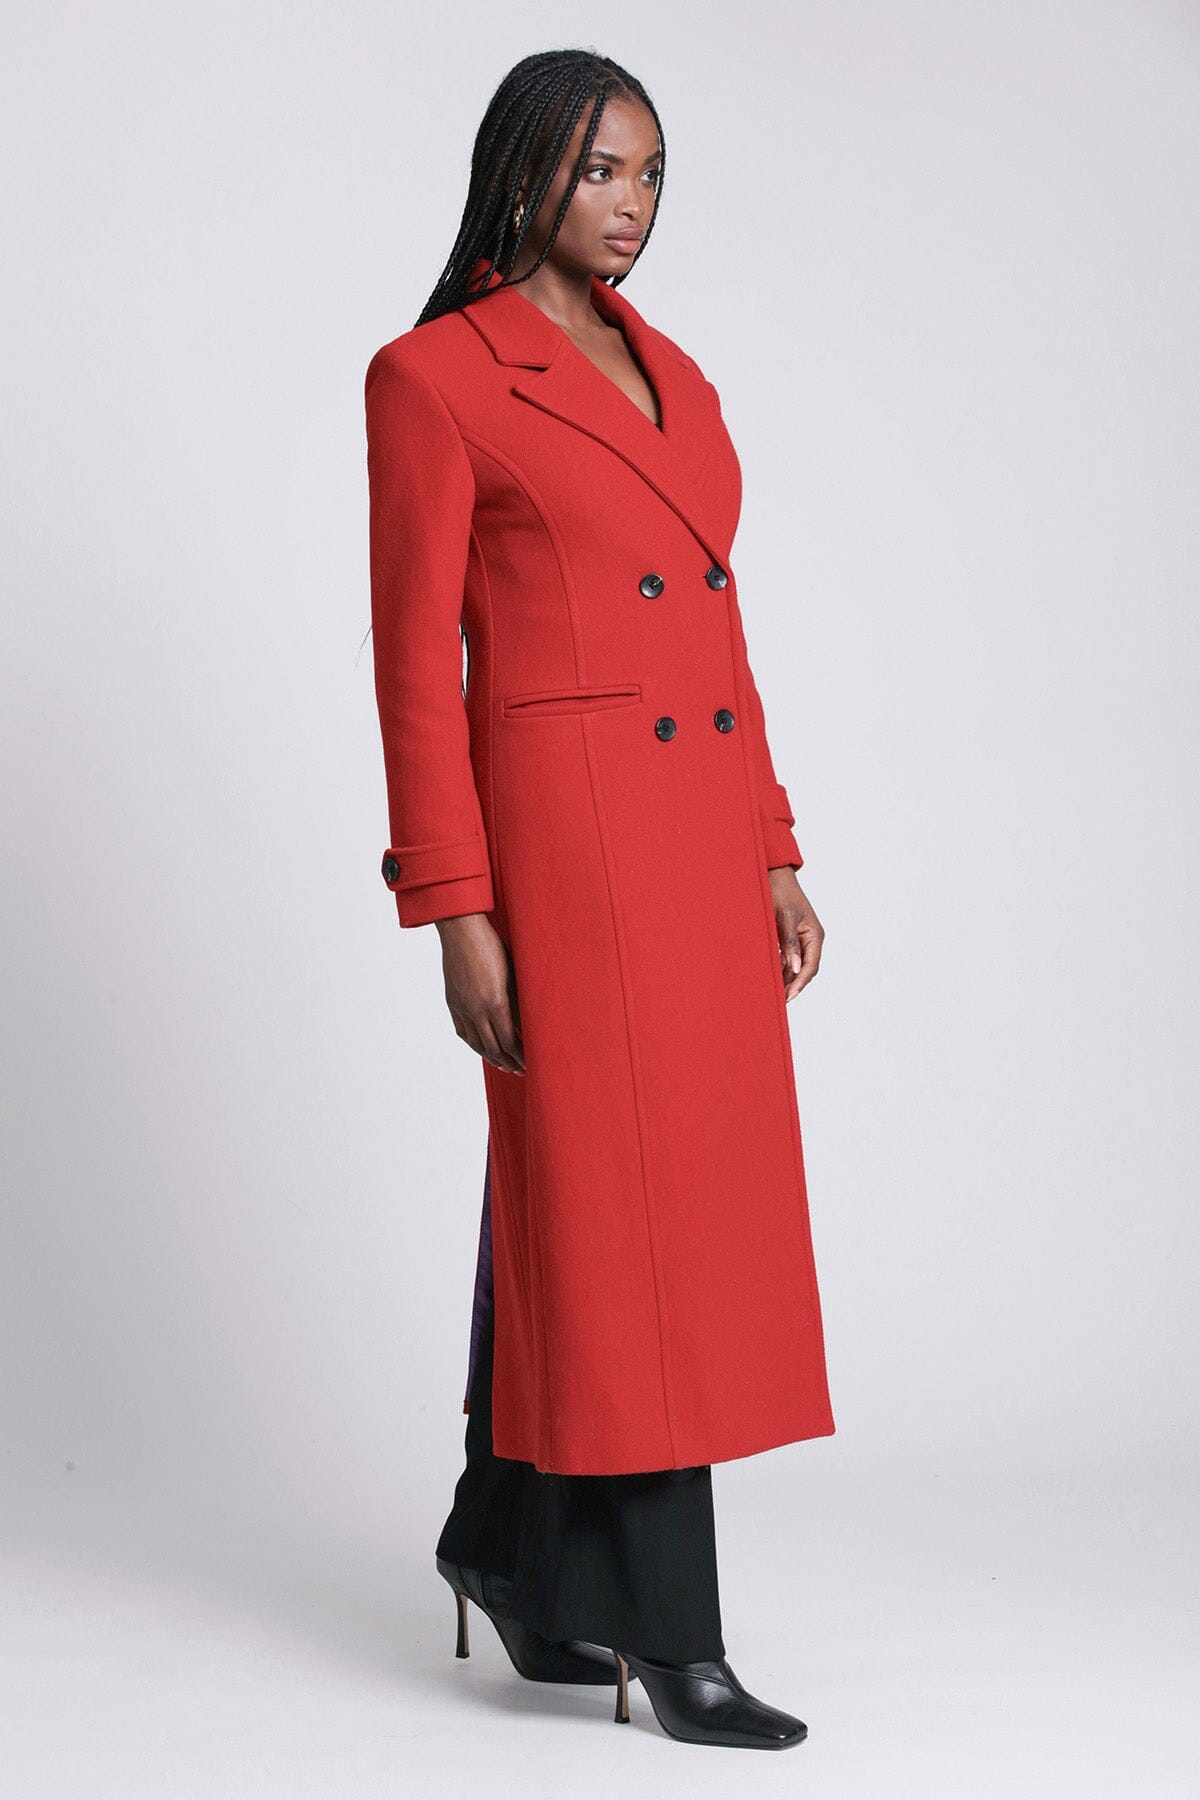 Red strong shoulder tailored wool blend long coat - women's figure flattering date night coats jackets for fall winter fashion trends